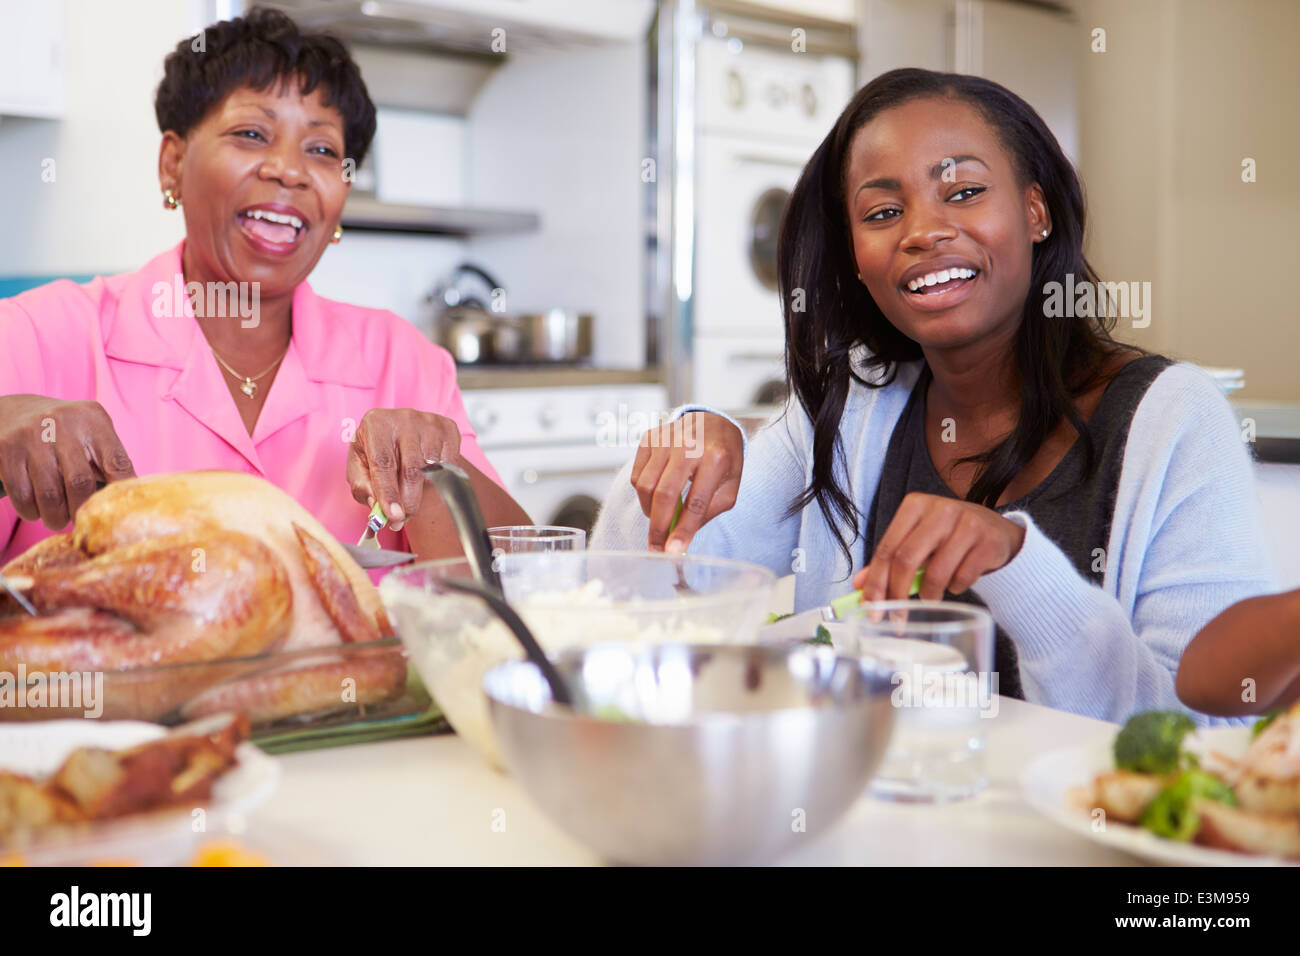 Mother And Adult Daughter Having Family Meal At Table Stock Photo